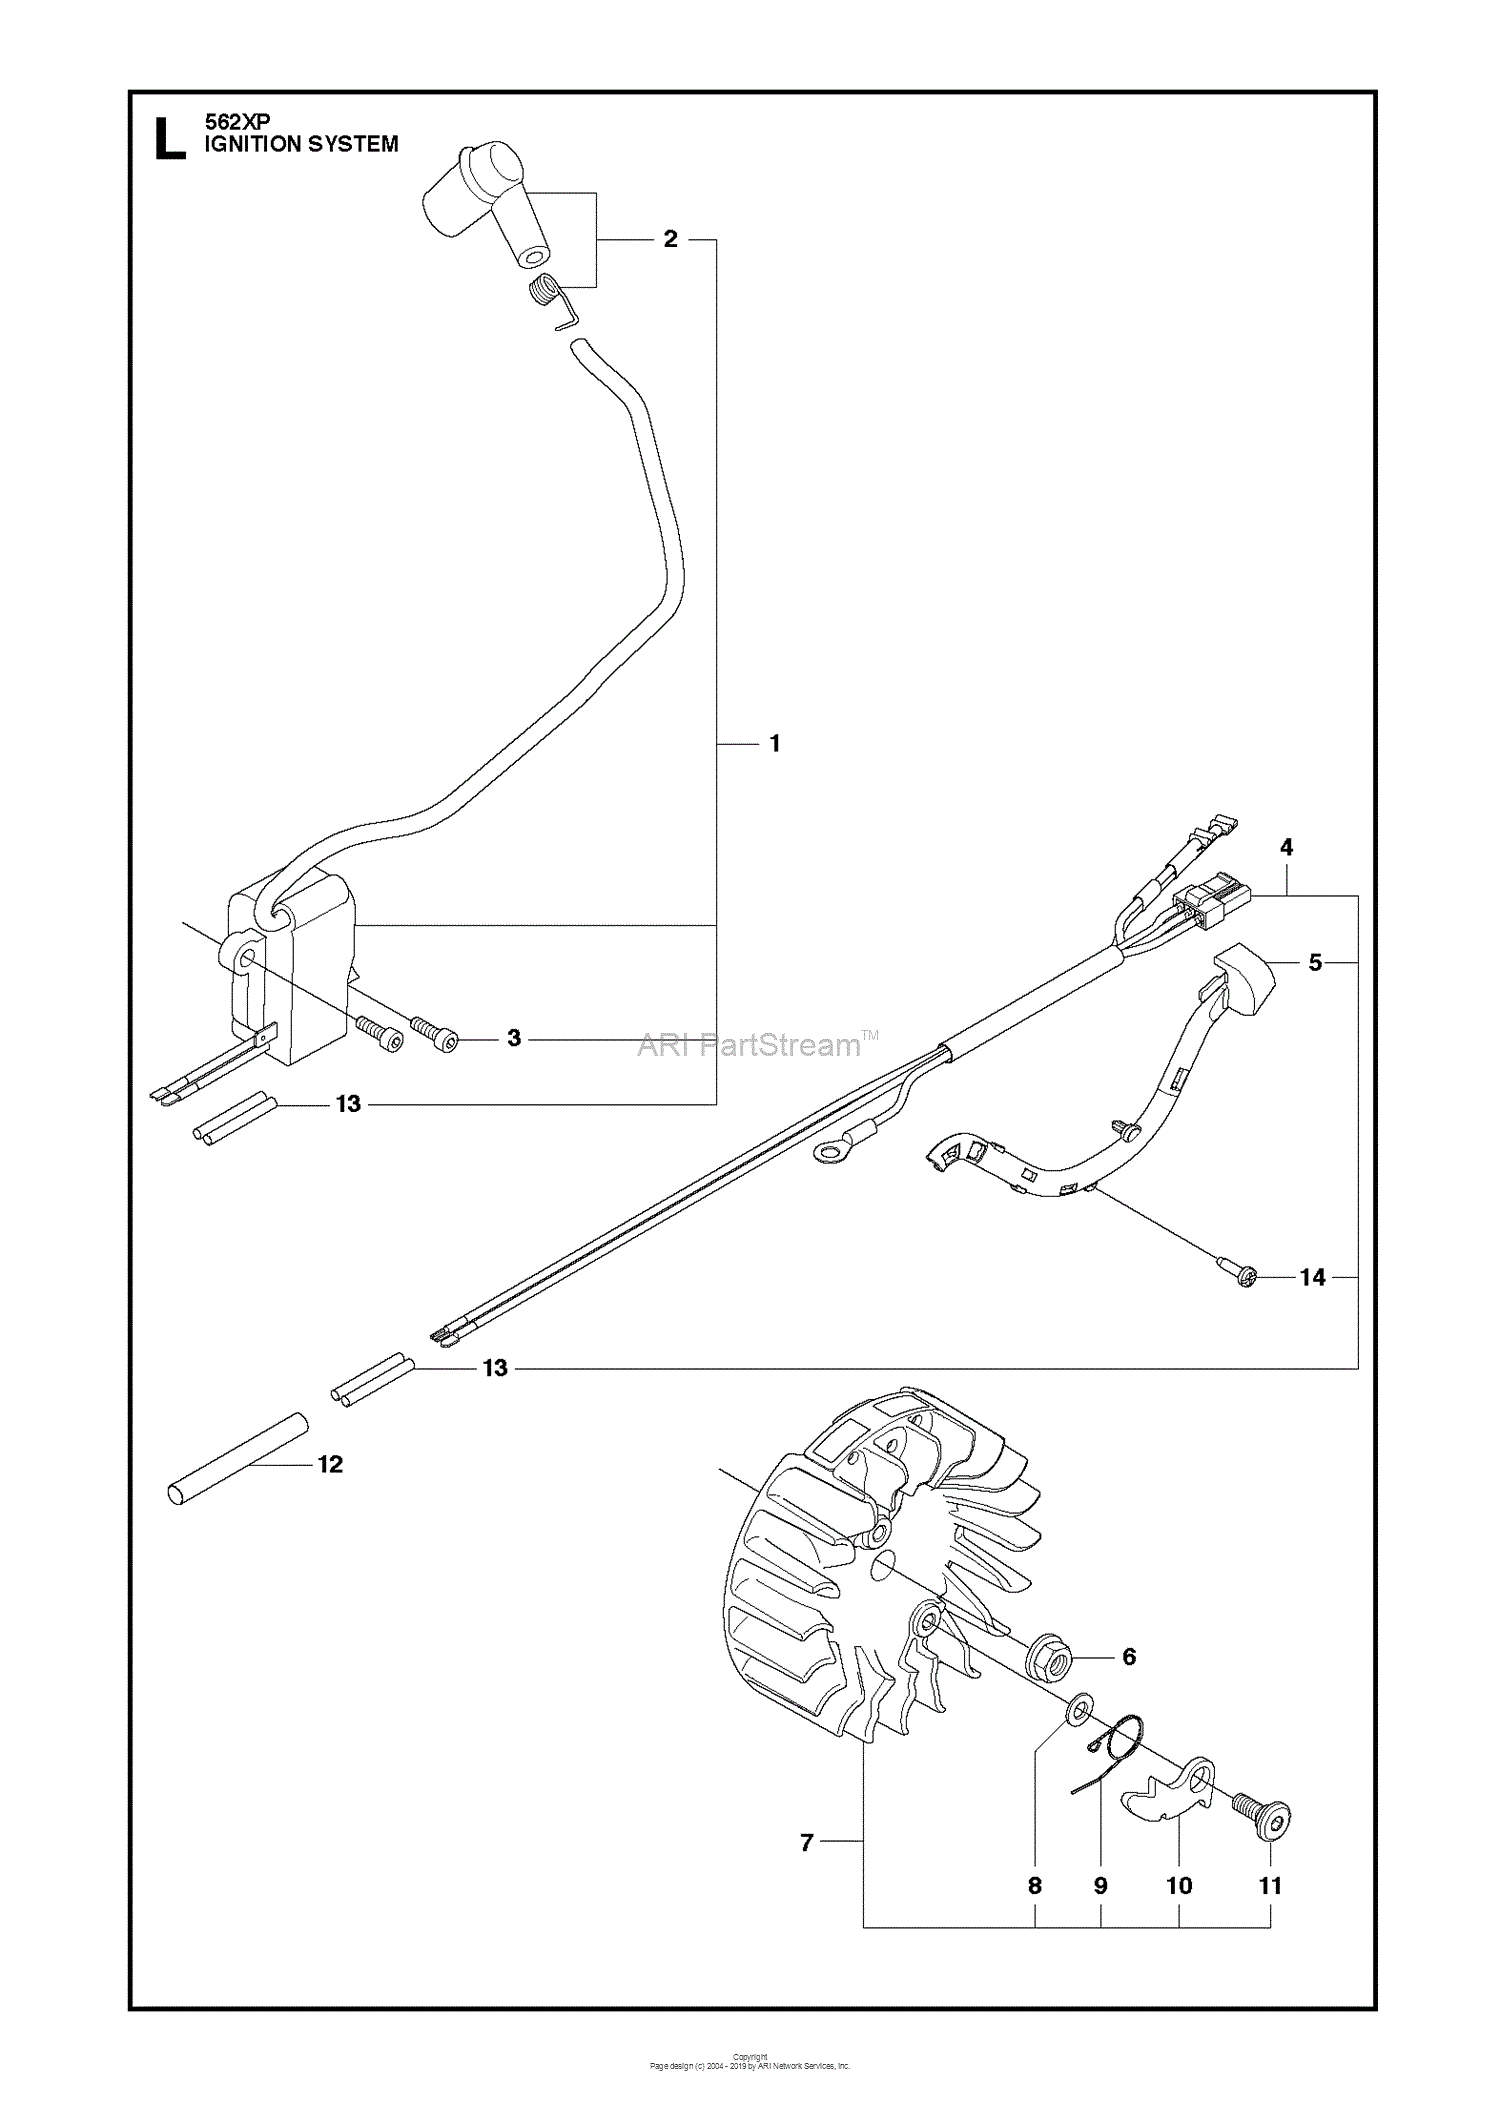 Husqvarna 562xp 11 06 Parts Diagram For Ignition System